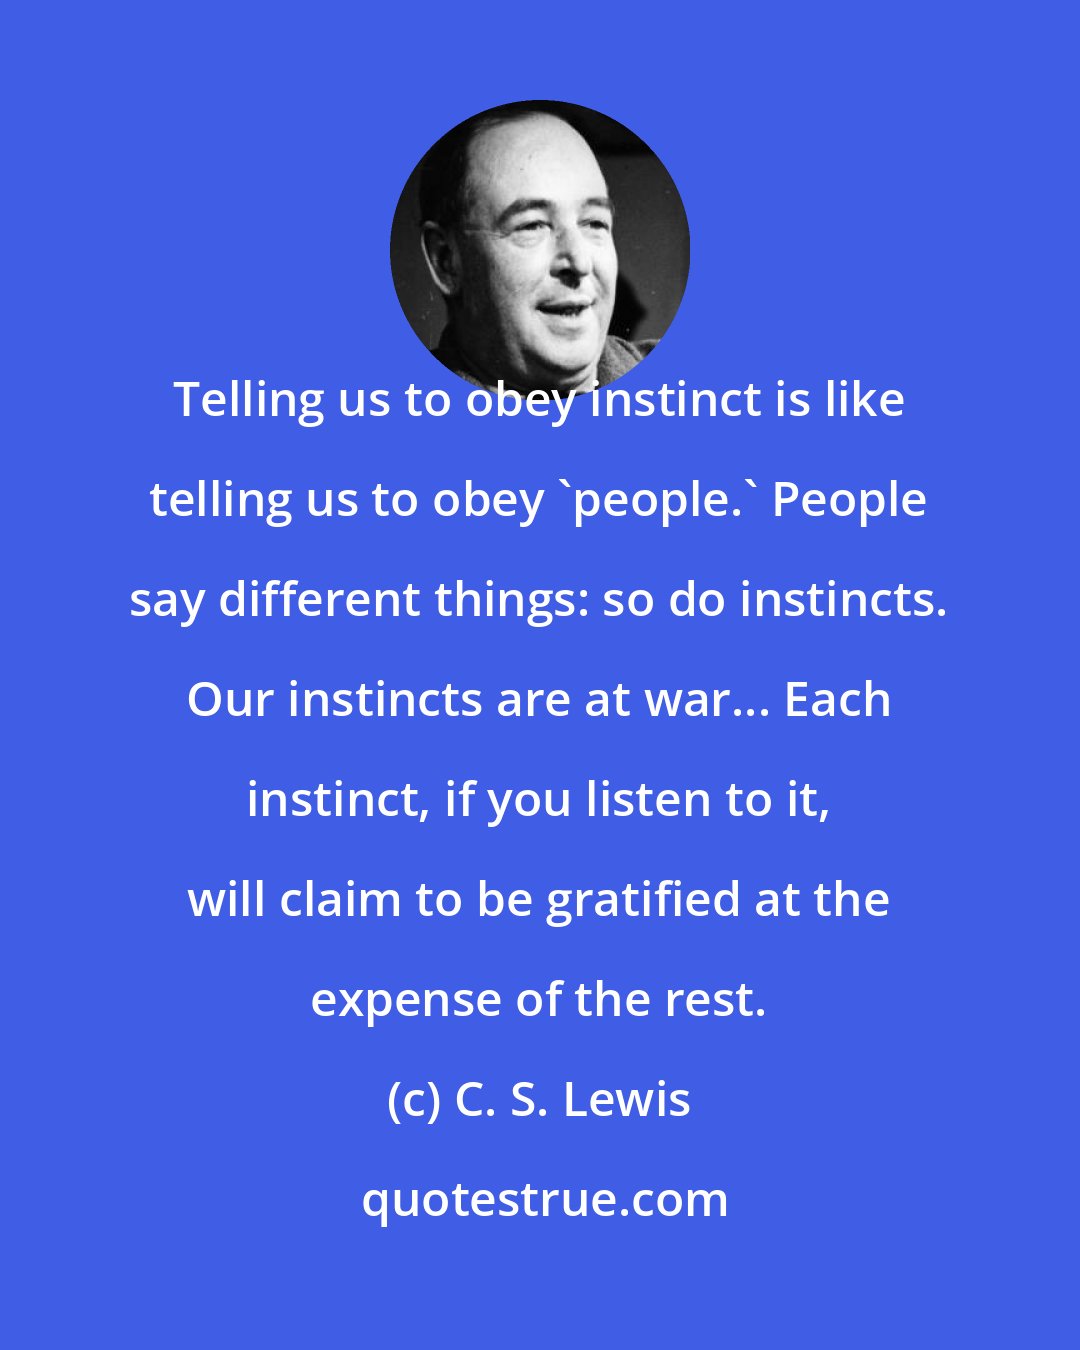 C. S. Lewis: Telling us to obey instinct is like telling us to obey 'people.' People say different things: so do instincts. Our instincts are at war... Each instinct, if you listen to it, will claim to be gratified at the expense of the rest.